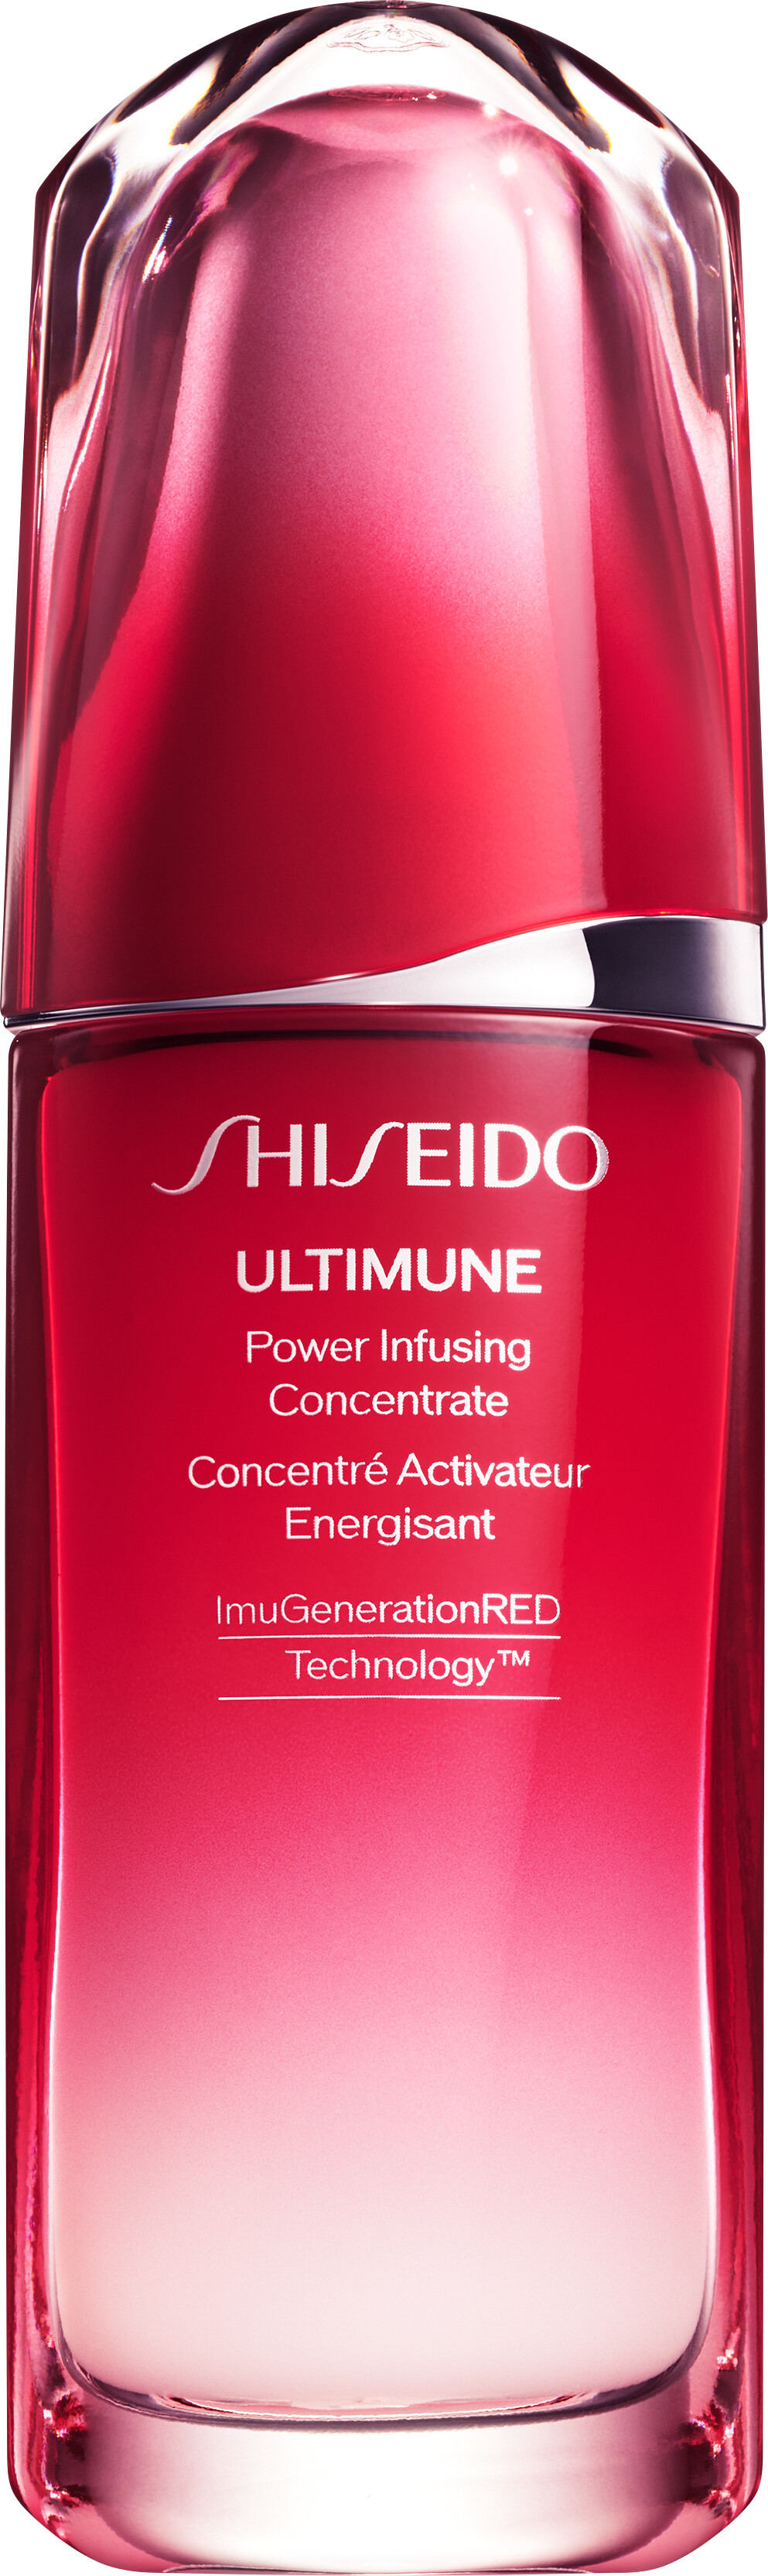 Shiseido Ultimune Power Infusing Concentrate with ImuGenerationRED Technology 3.0 75ml